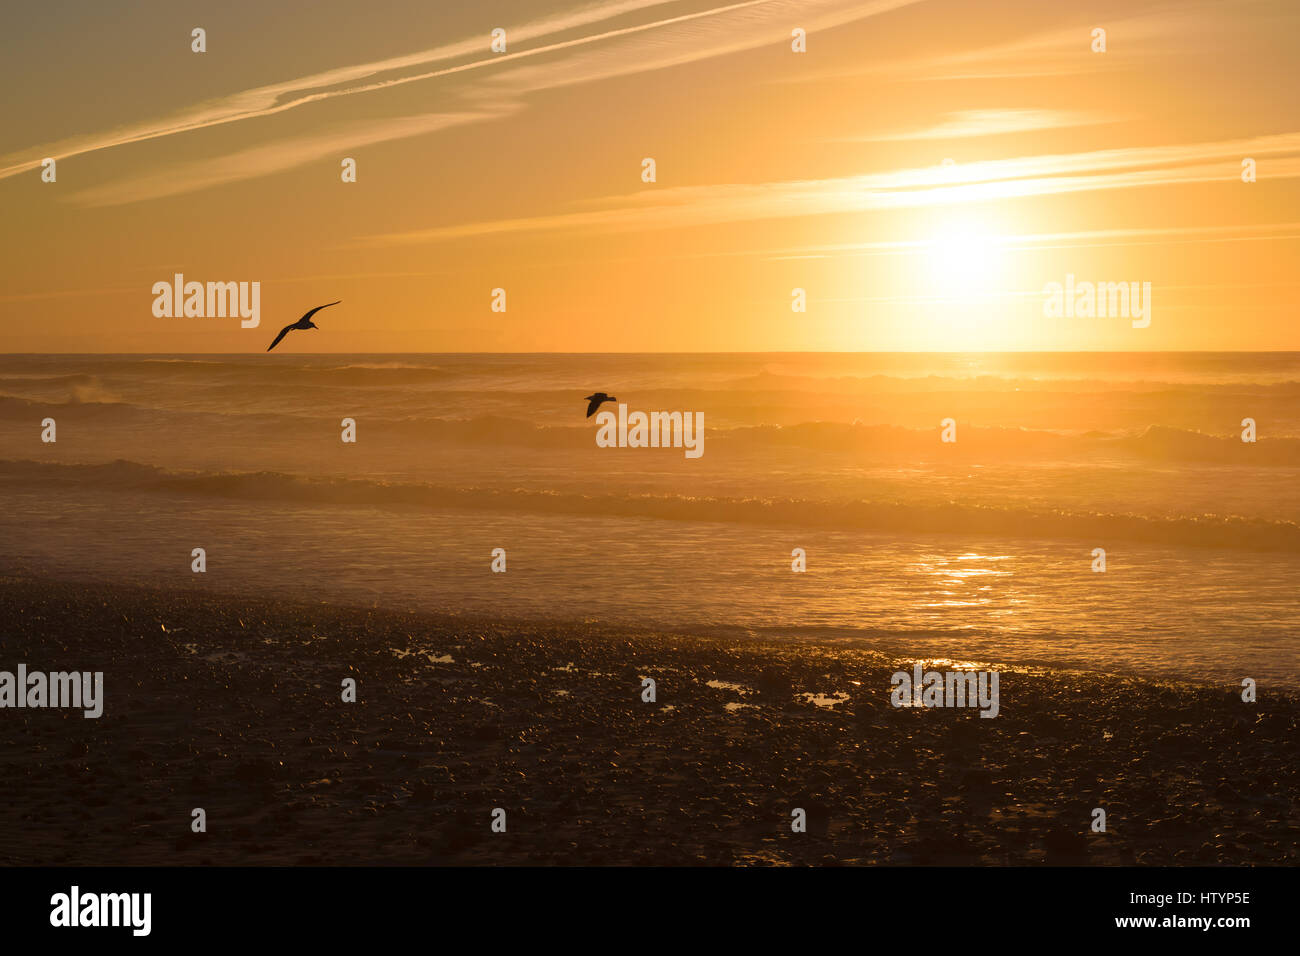 Image of a beautiful sunset during golden hour with two birds flying around at a beach in Morocco. Stock Photo